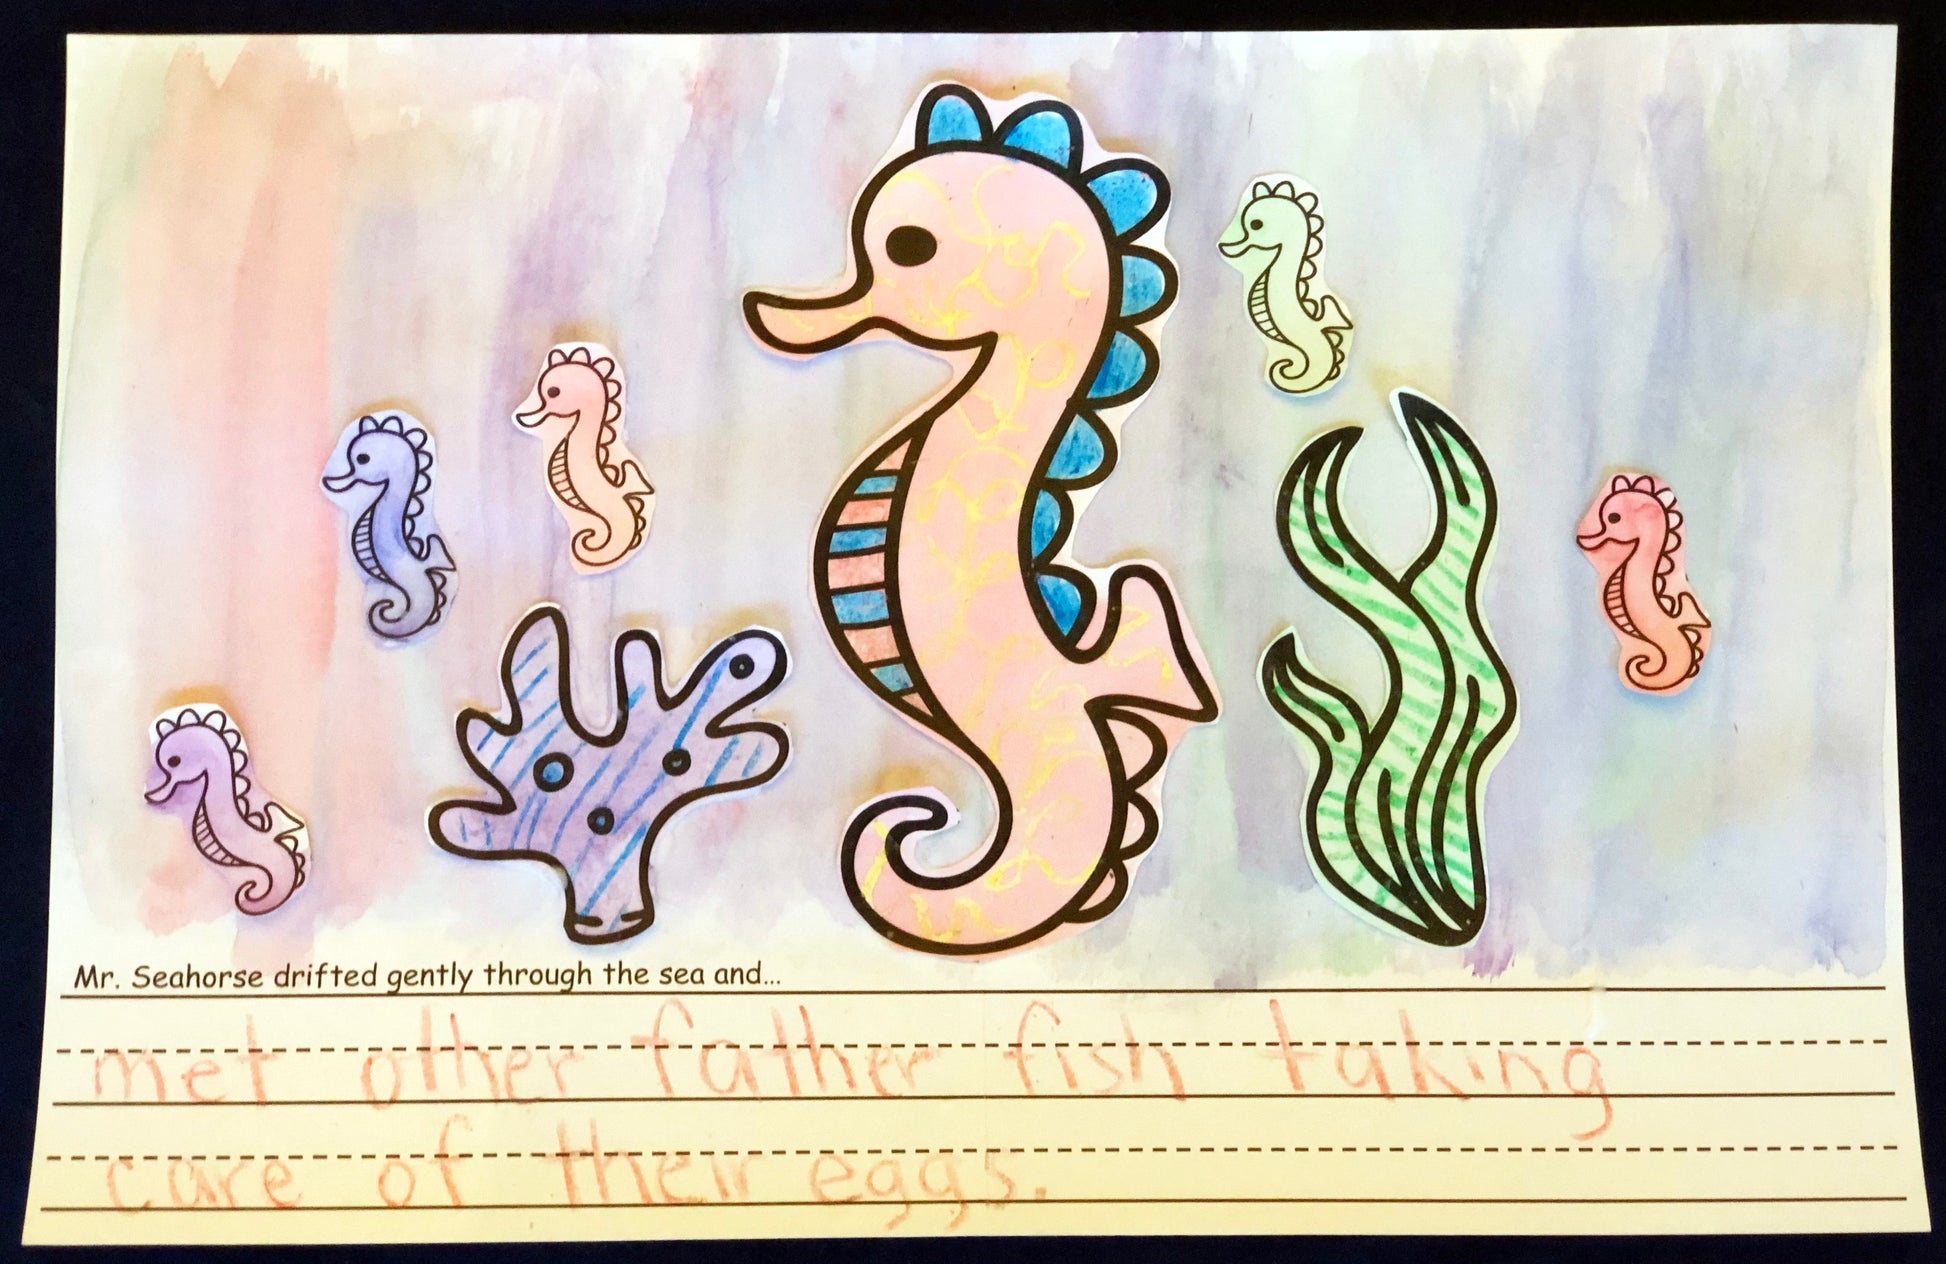 Collage inspired by Eric Carle and Mister Seahorse